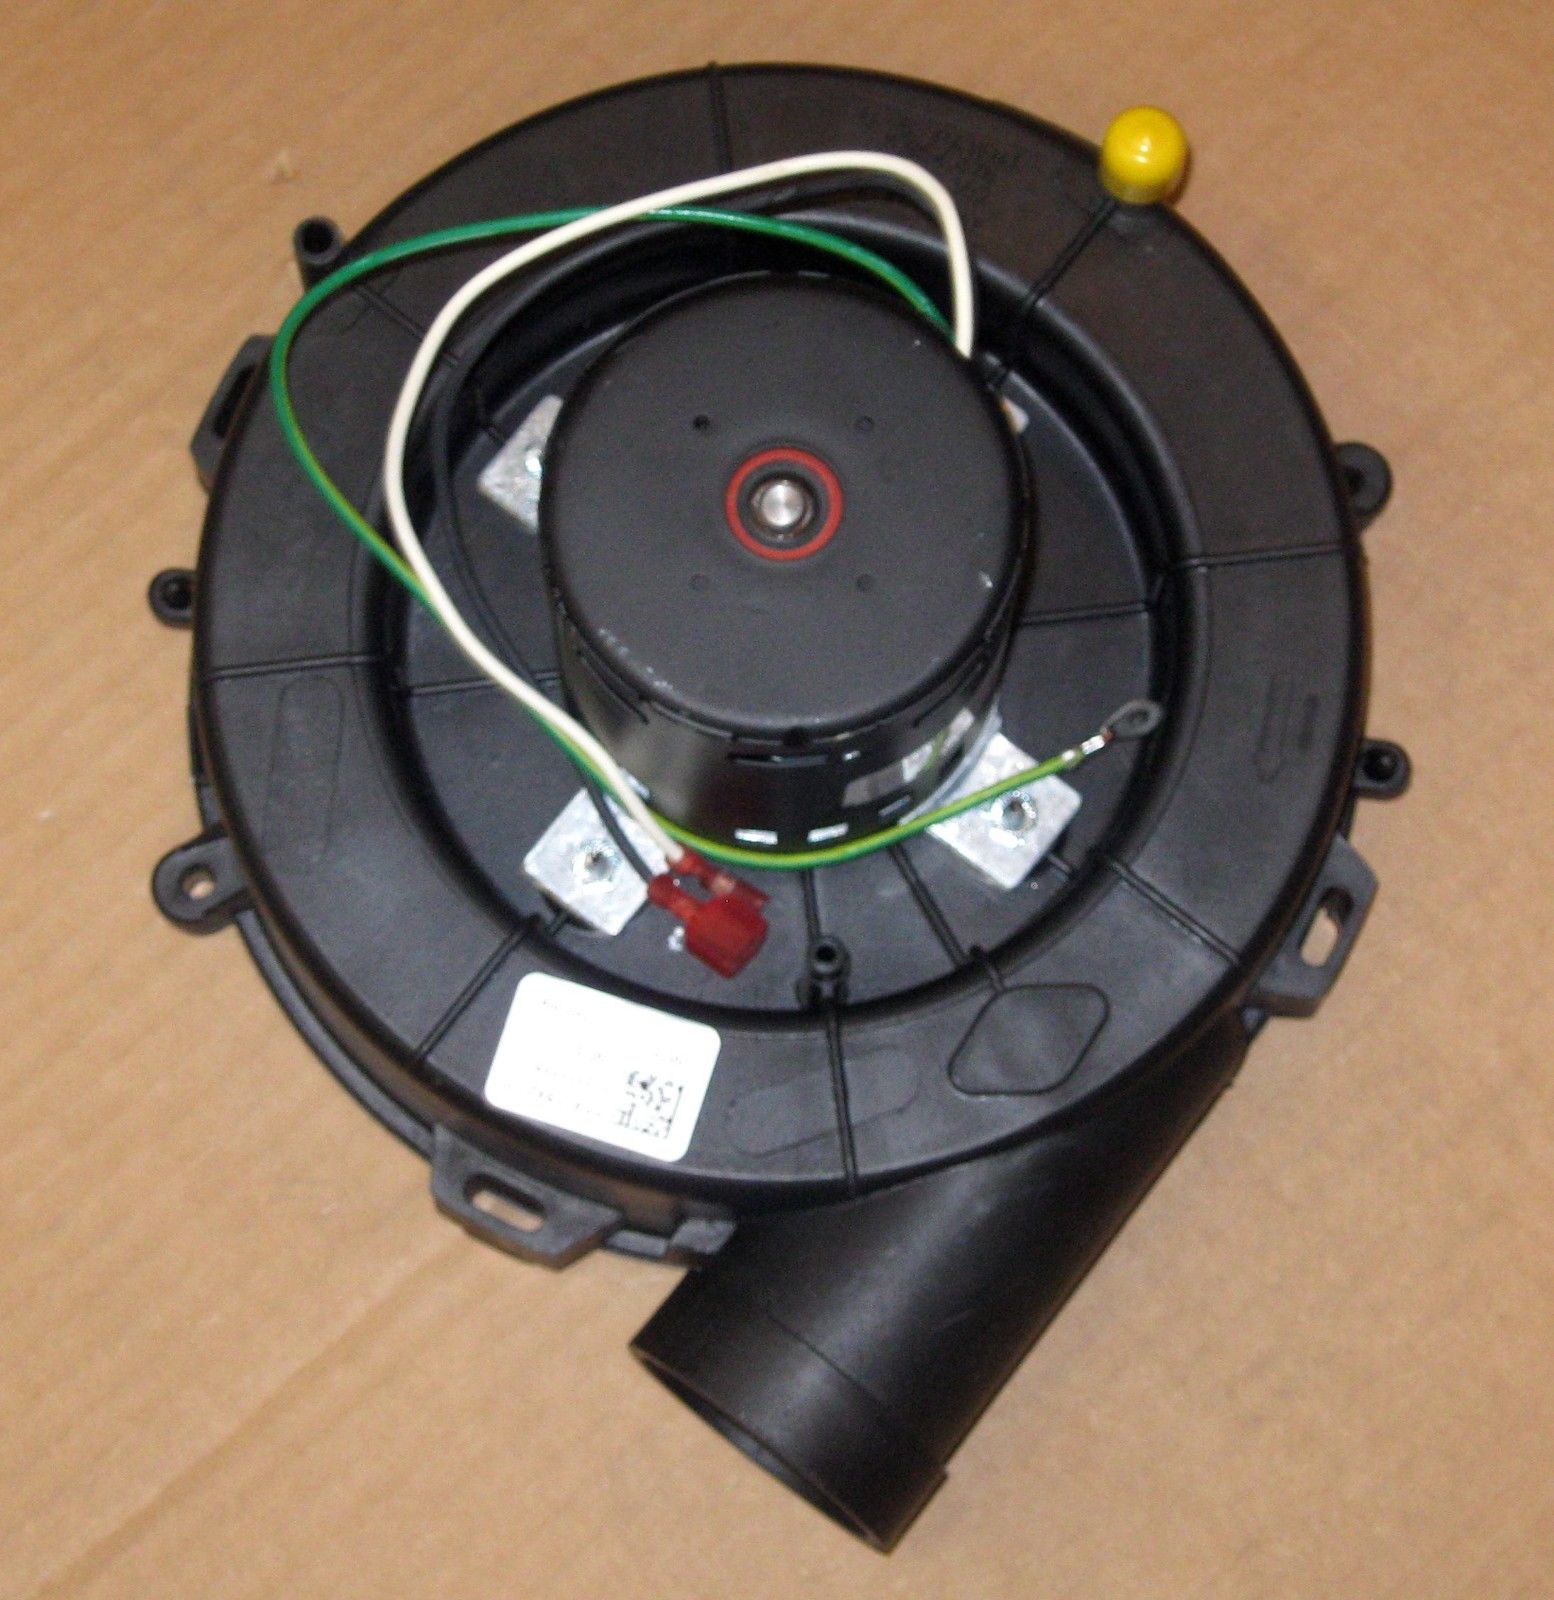 Fasco A180 Draft Inducer Blower Motor for Goodman 7021-9625 201-90601 - image 3 of 9